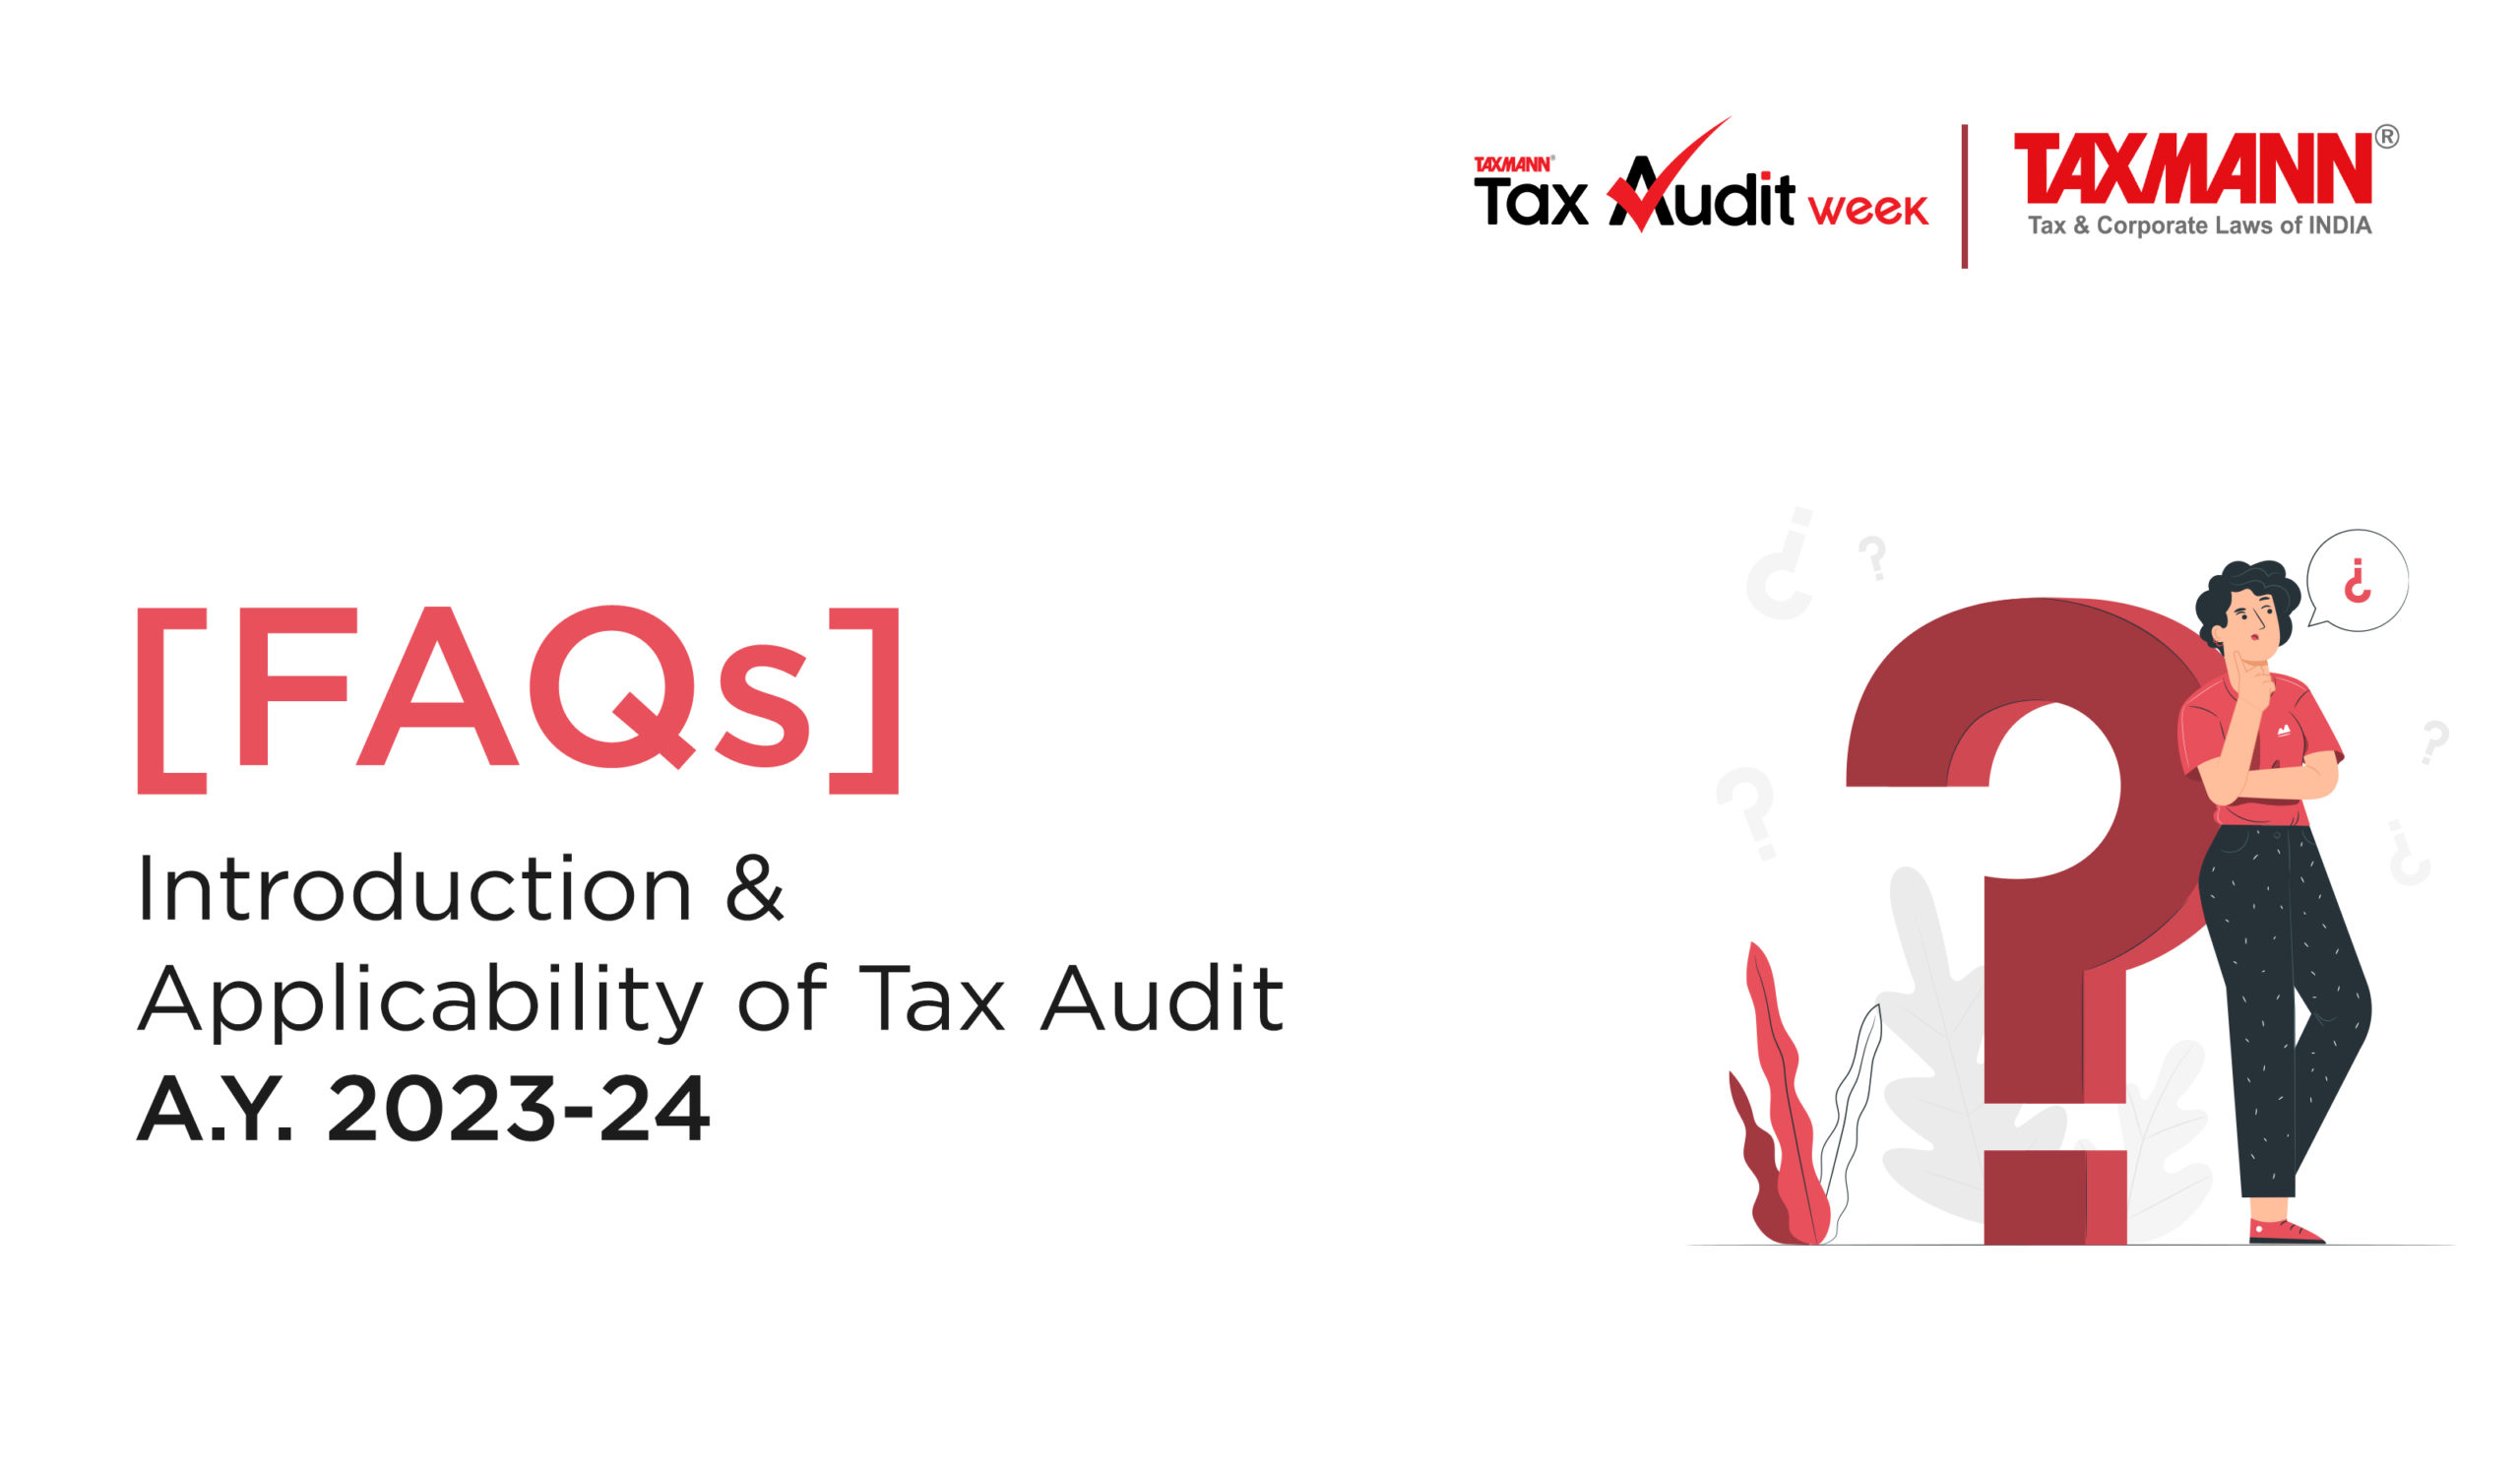 faqs-introduction-applicability-of-tax-audit-a-y-2023-24